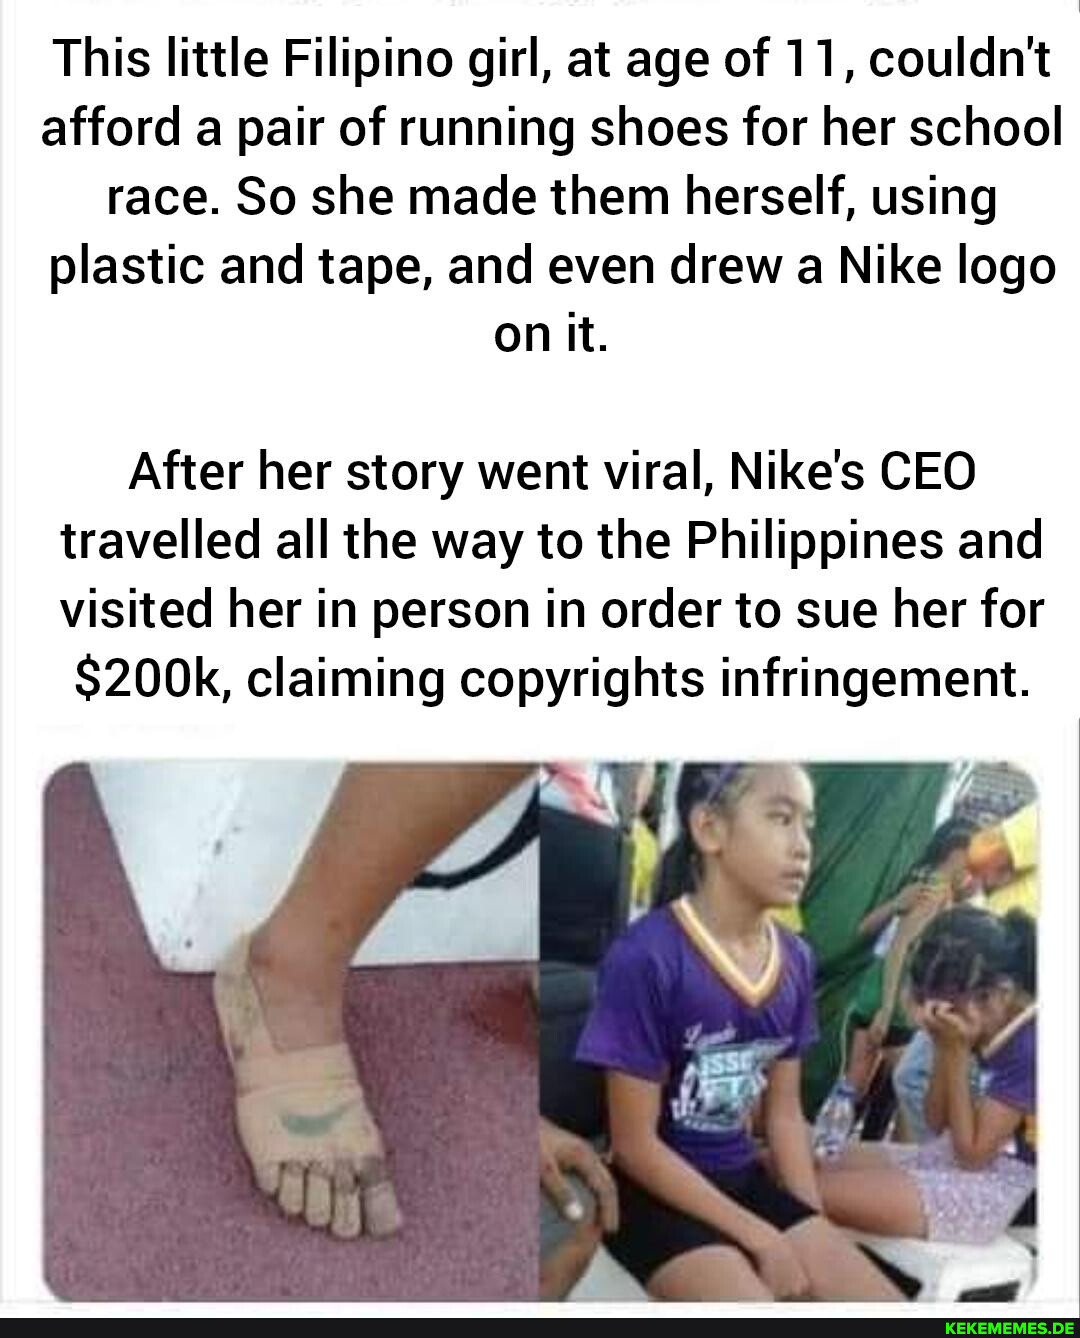 This little Filipino girl, at age of 11, couldn't afford a pair of running shoes